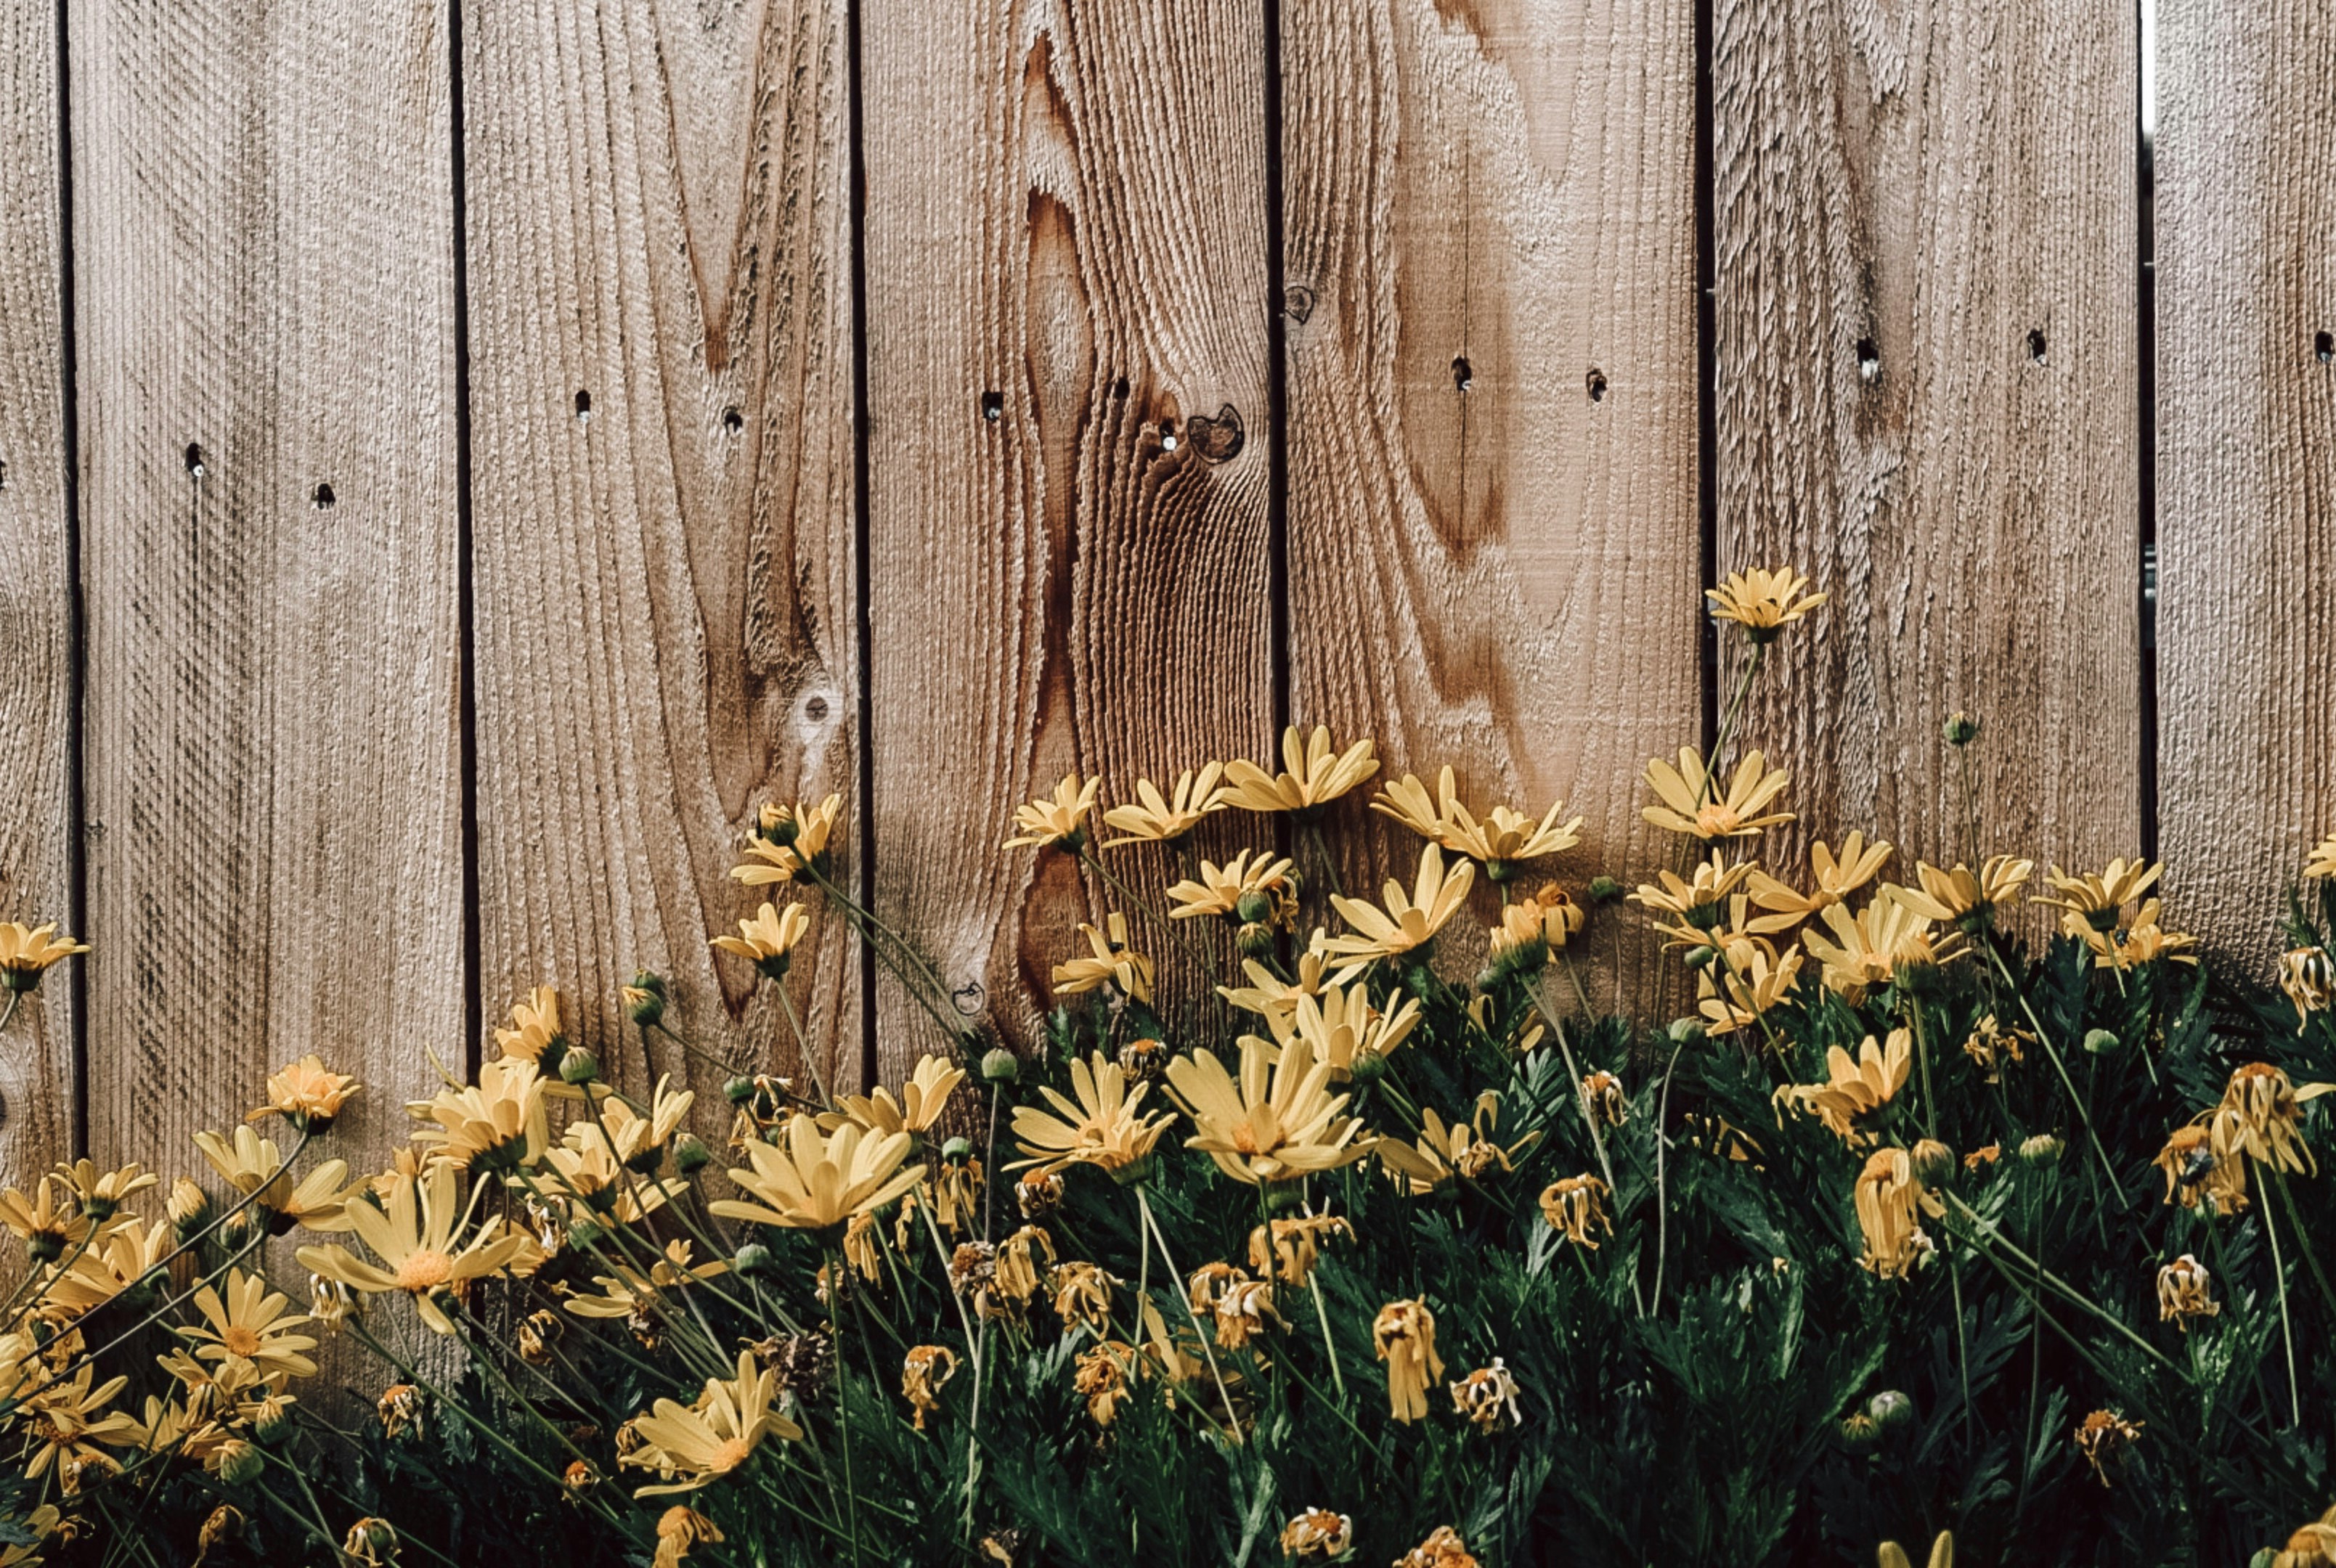 yellow flowers beside brown wooden fence